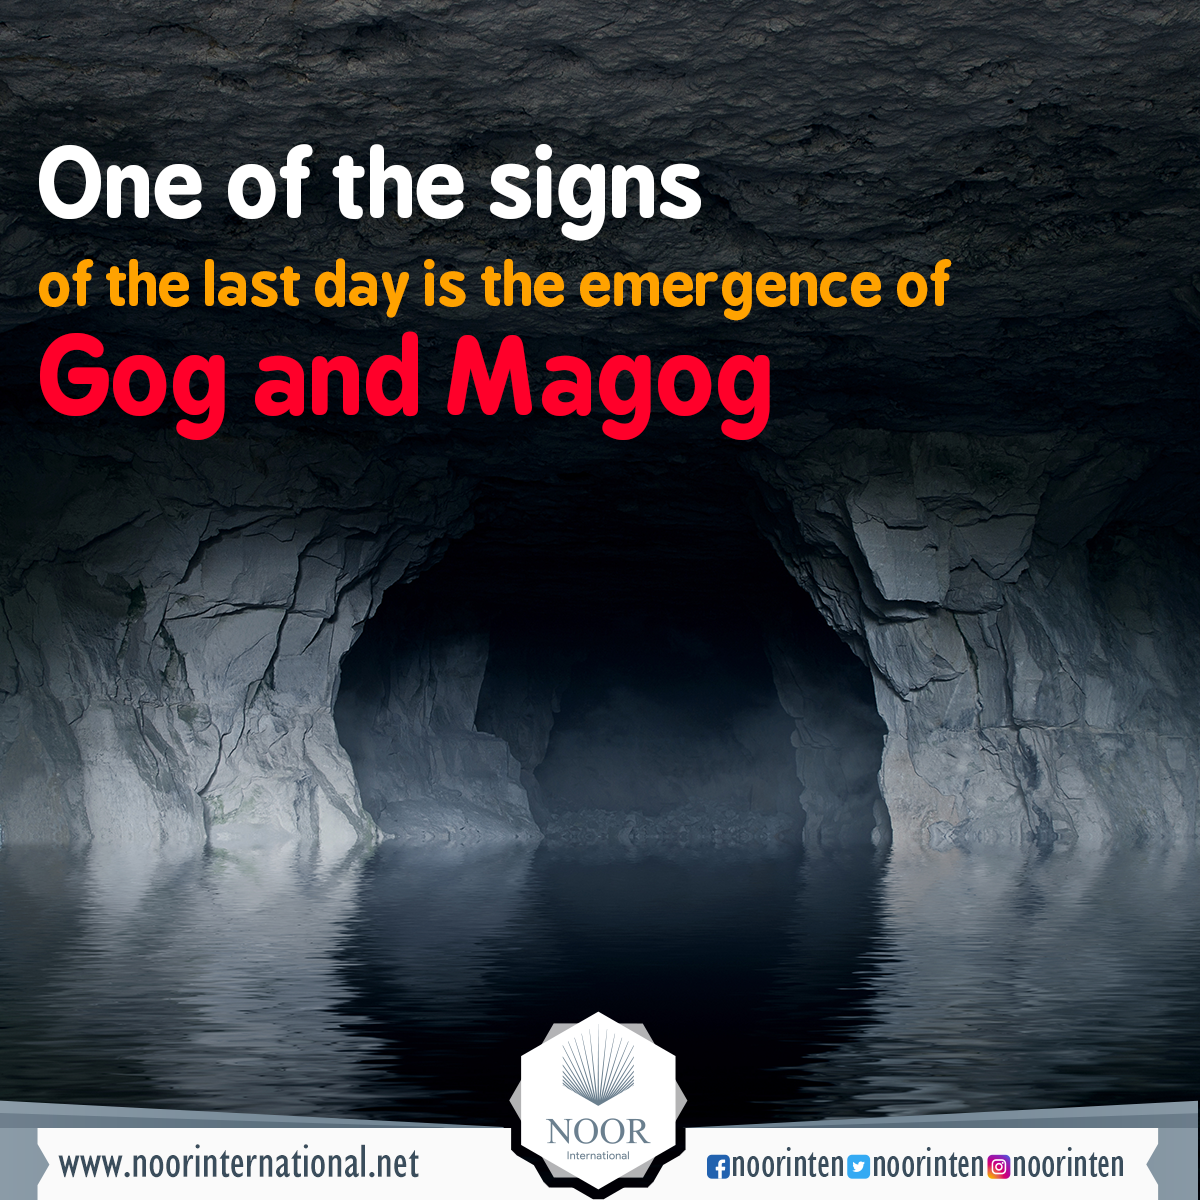 One of the signs of the last day is the emergence of Gog and Magog